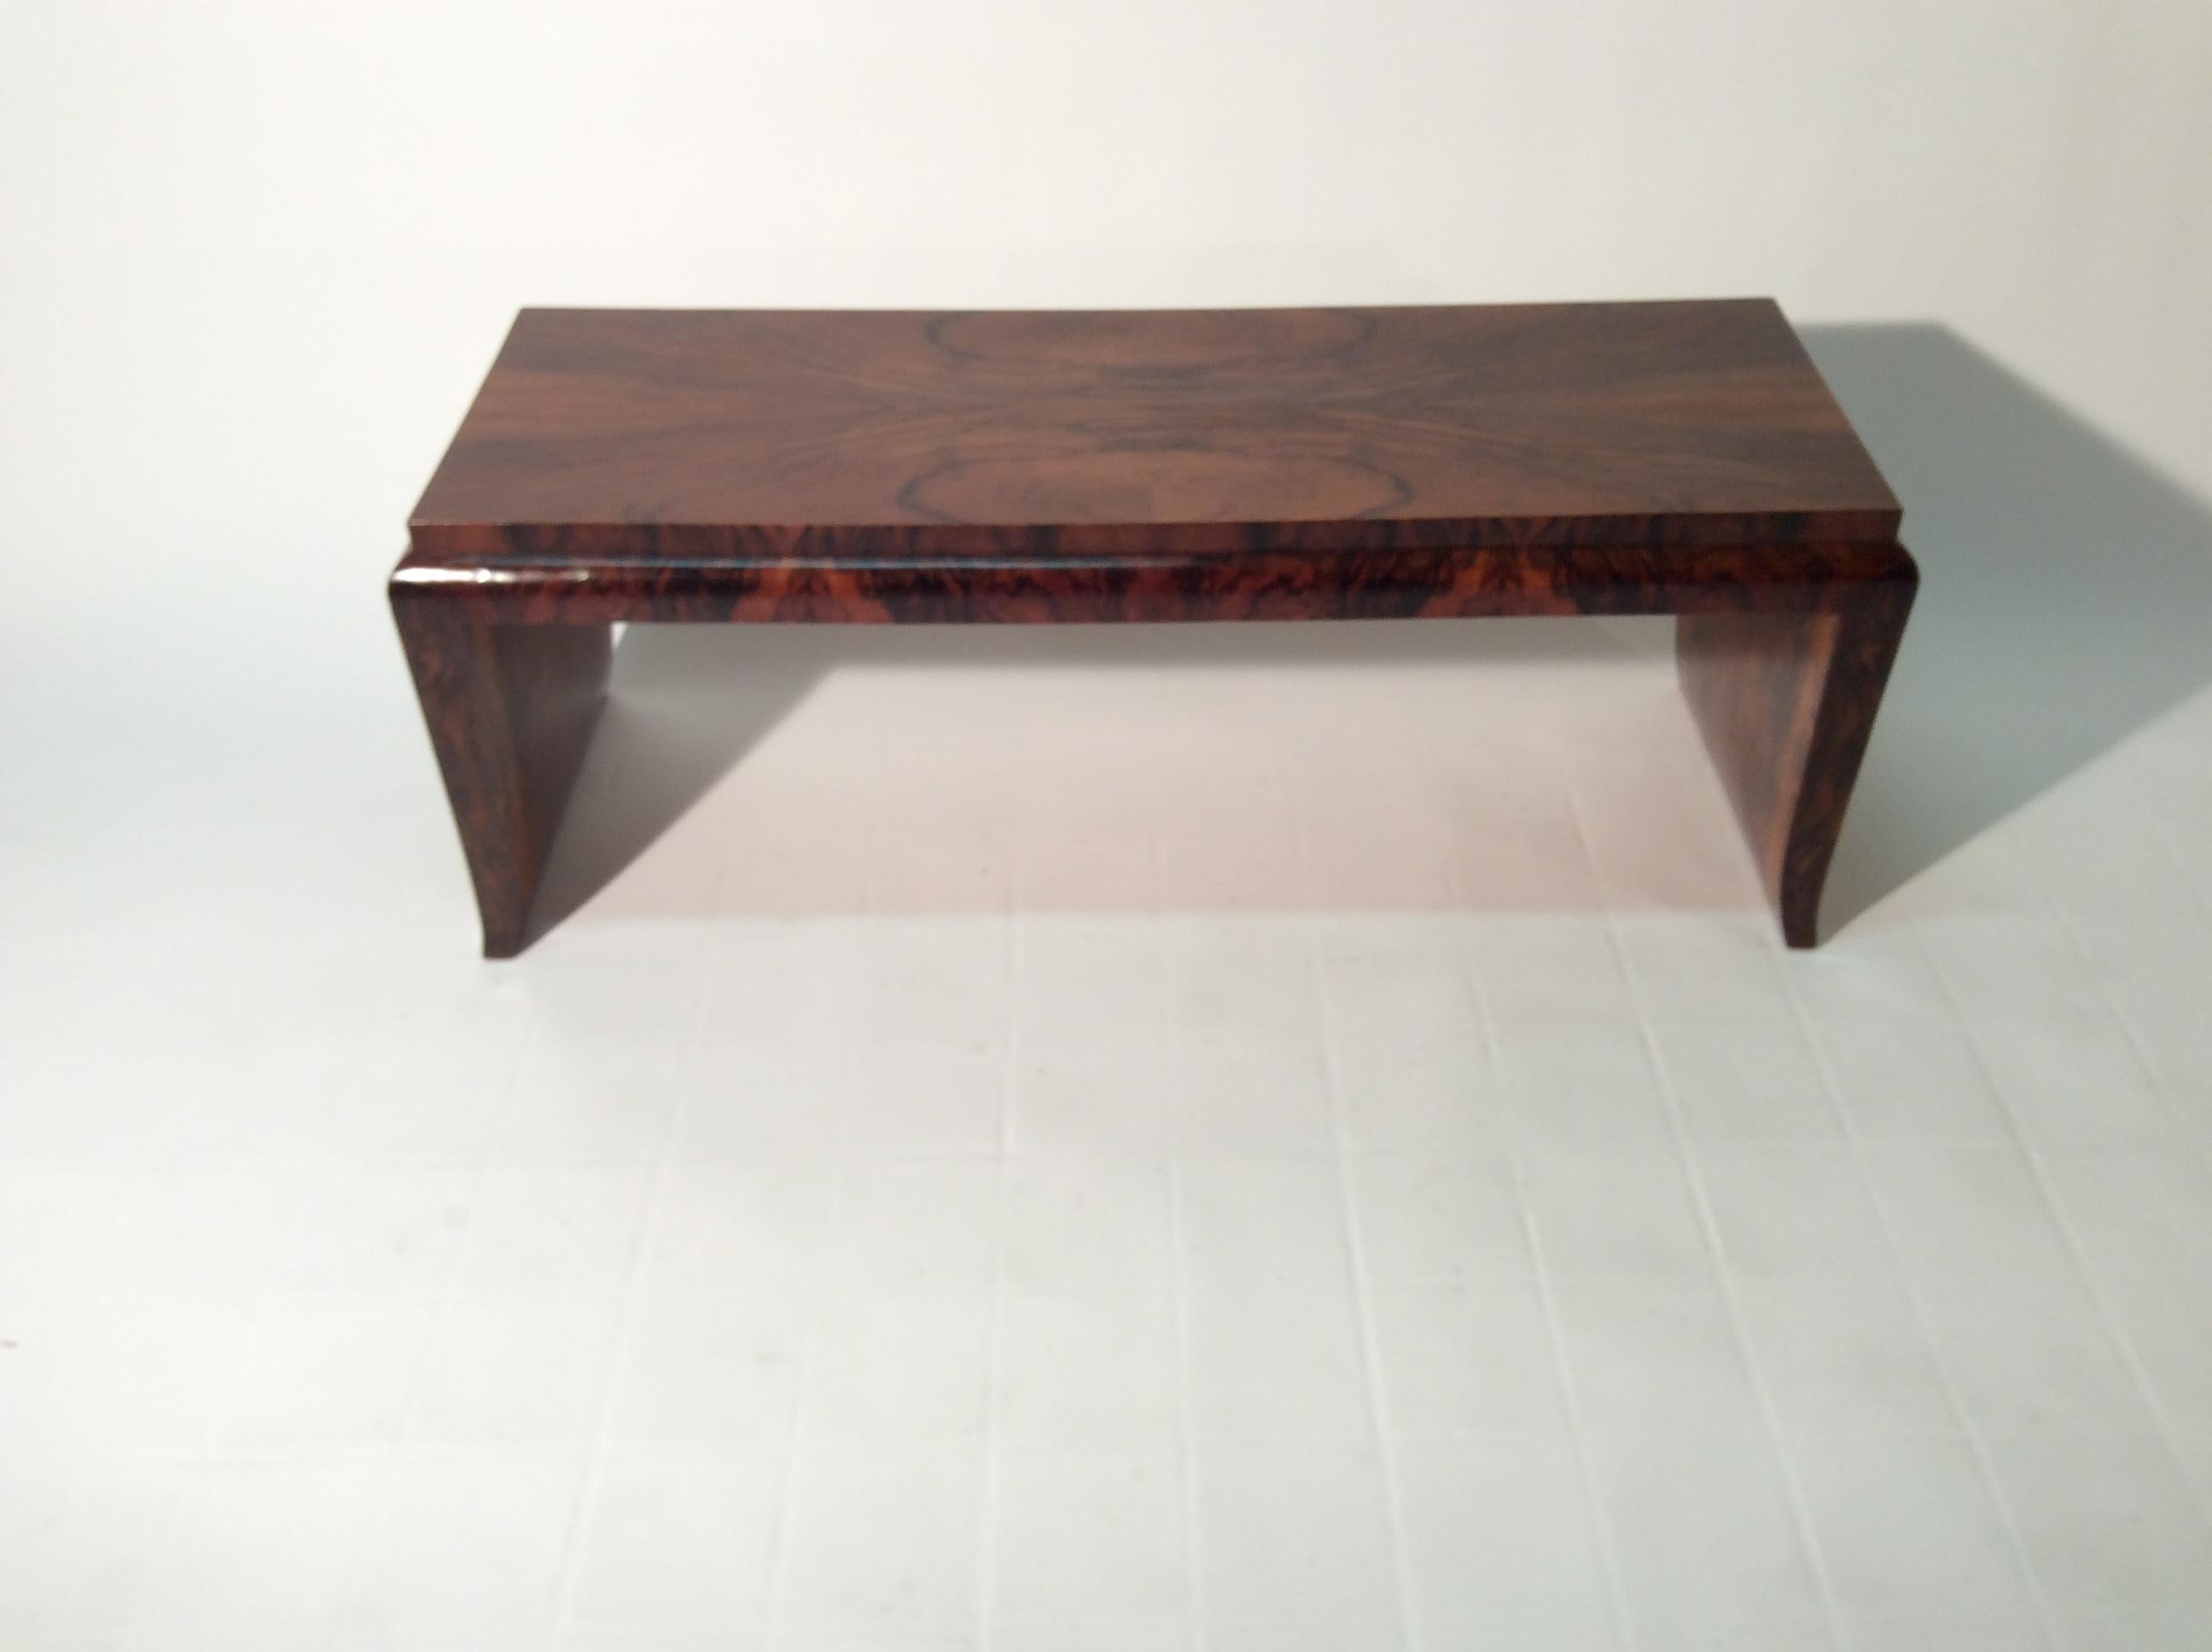 Mid-20th Century Art Deco Rectangular Coffee Table or Bench with Precious and Elegant Material